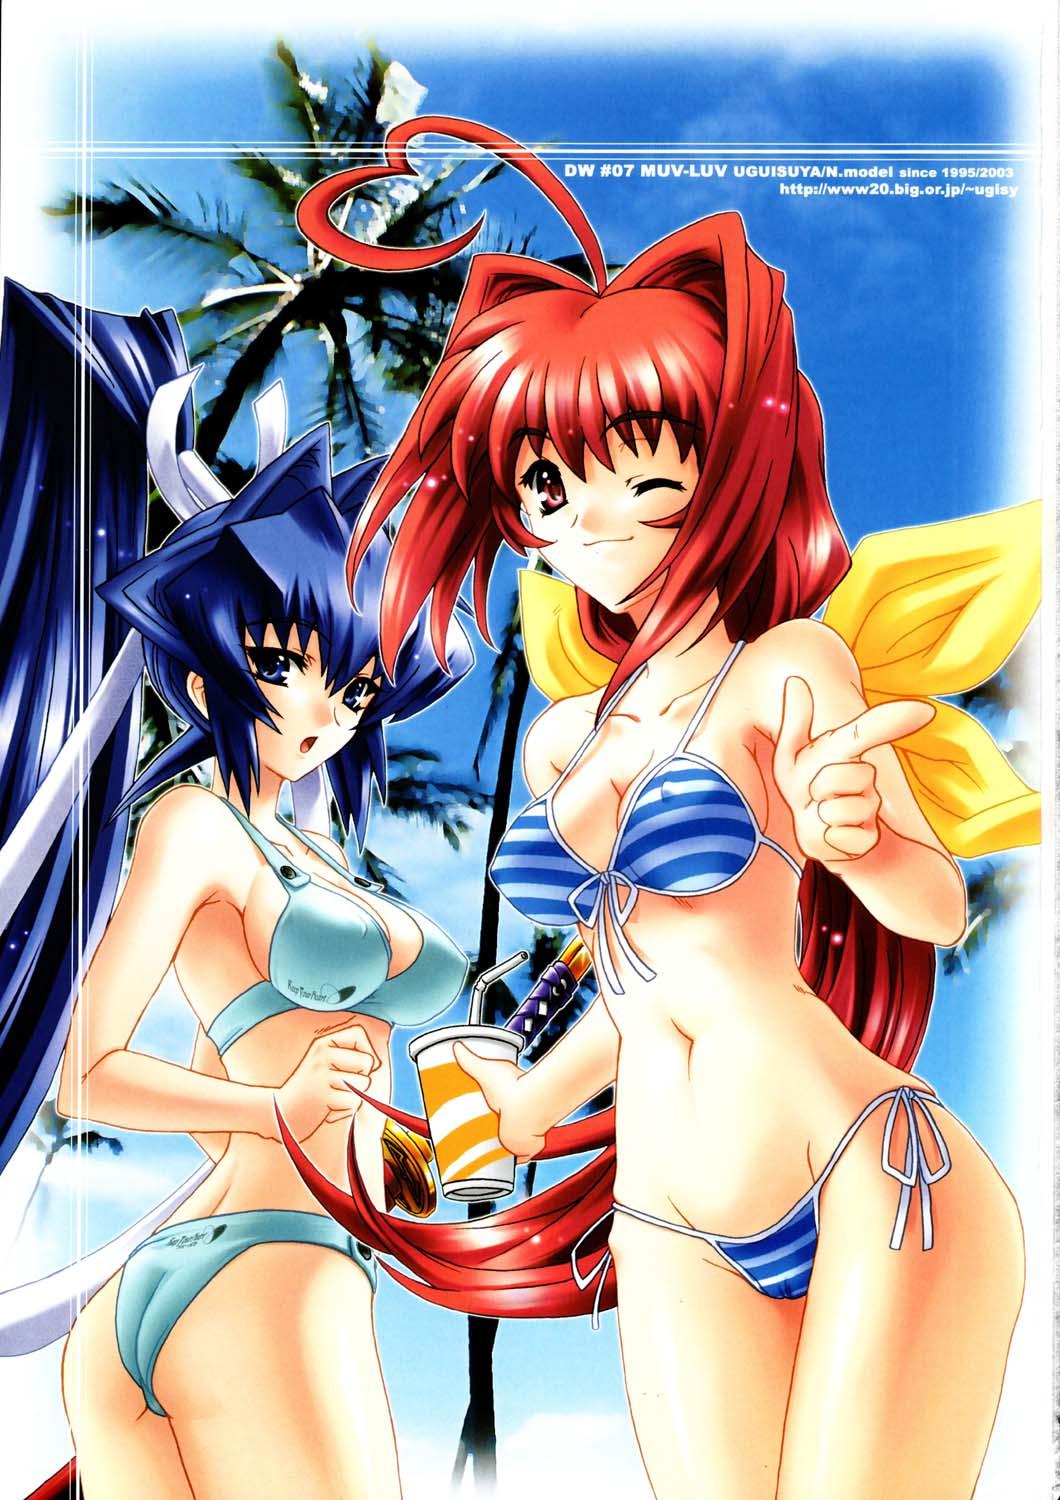 Sex Pussy Itsudemo nonchalant! - Muv-luv Freak - Page 2